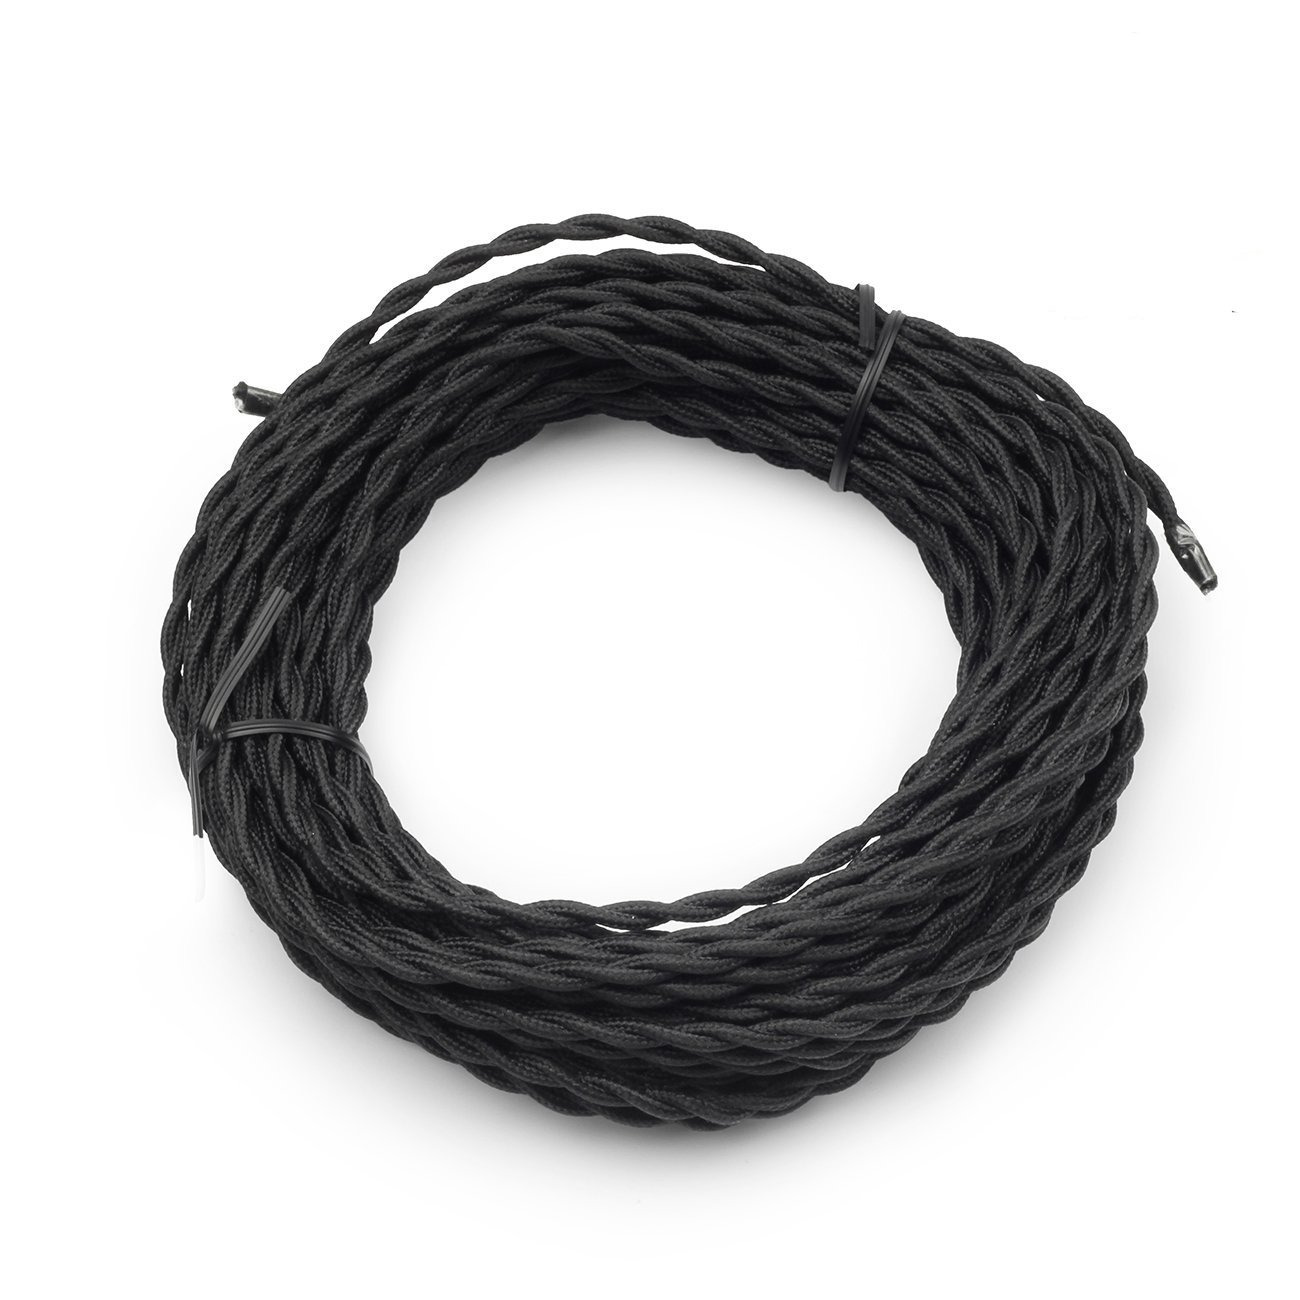 Supmart Black Twisted Cloth Covered Wire, 2-Conductor 18-Gauge Antique Industria